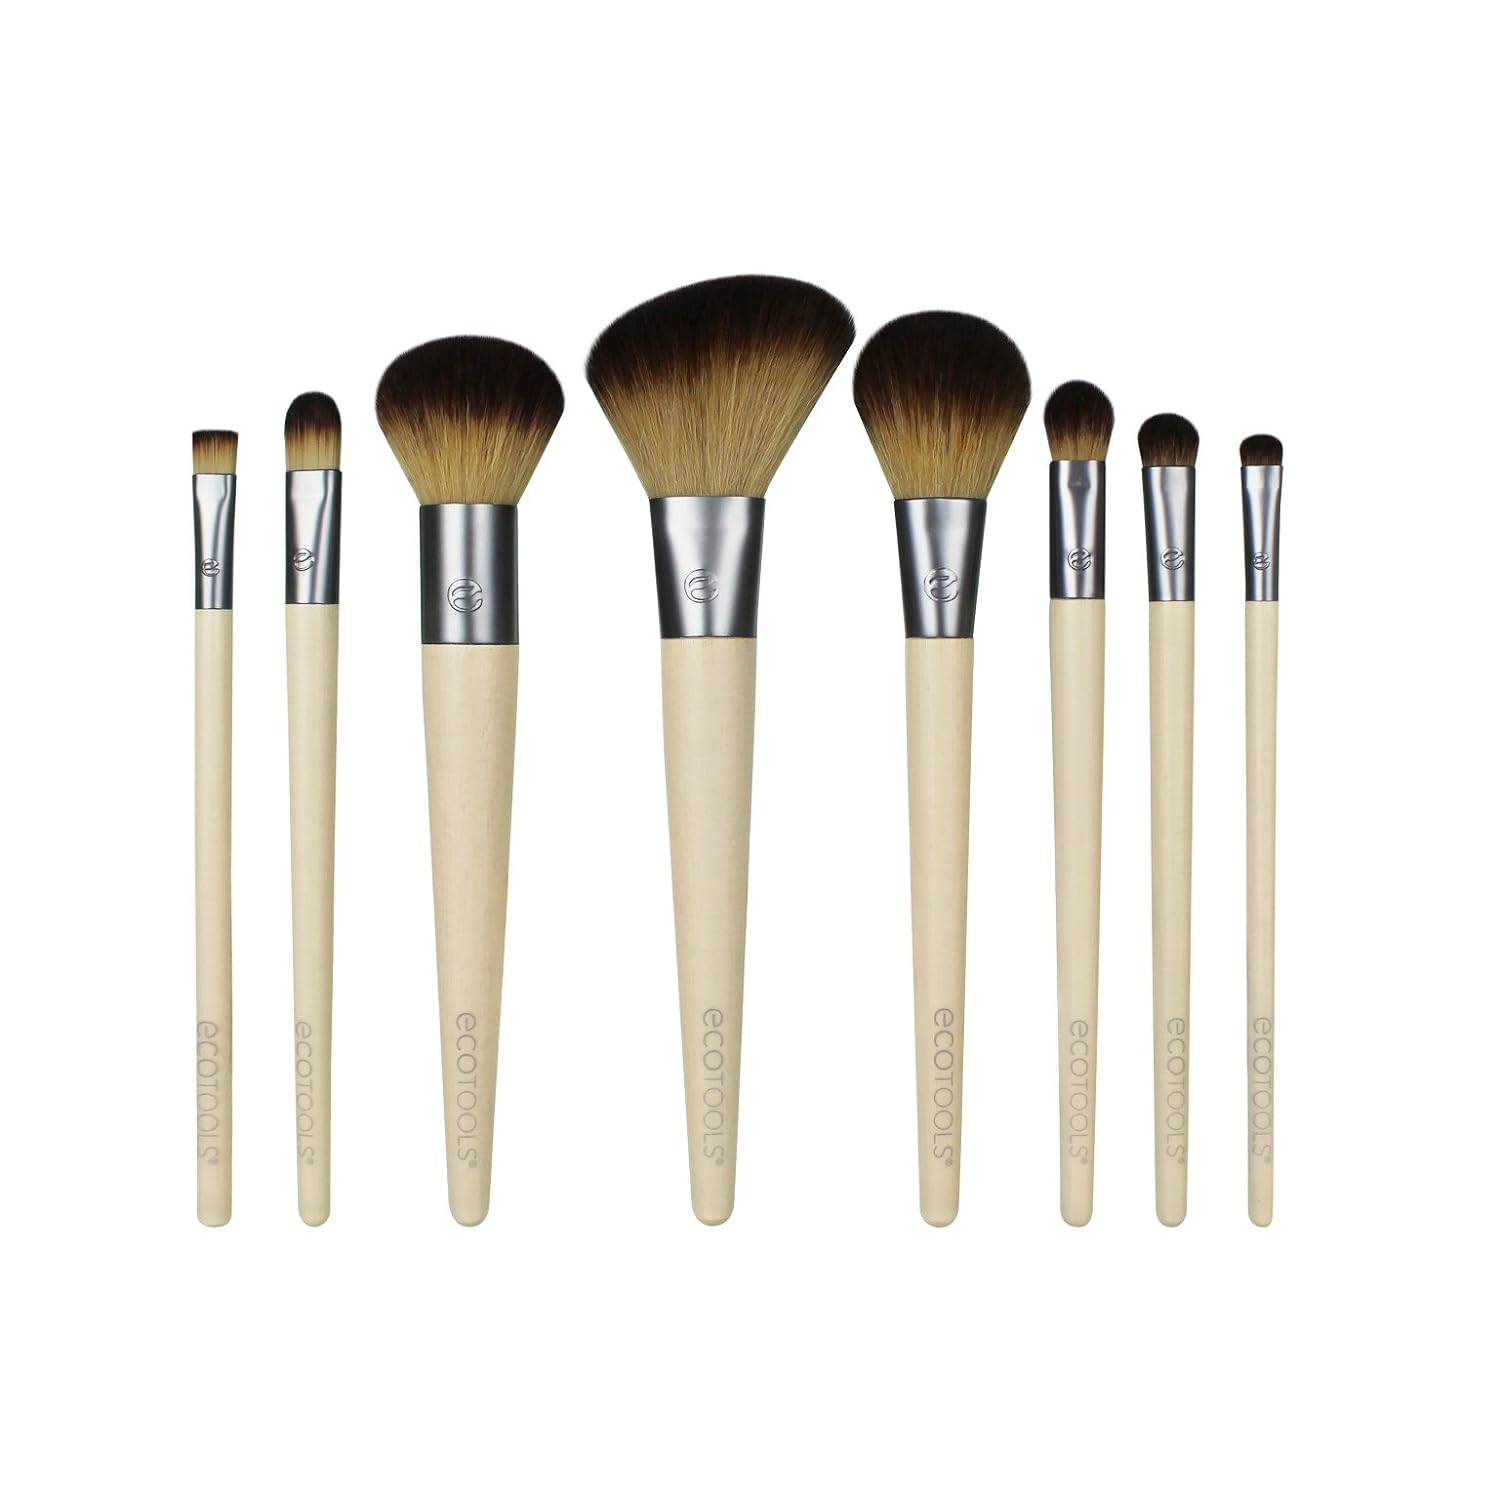  EcoTools-Cruelty Free Confidence in Bloom Brush Set-Cruelty Free Synthetic Taklon Bristles, Recycled Packaging, Recycled Aluminum Ferrules